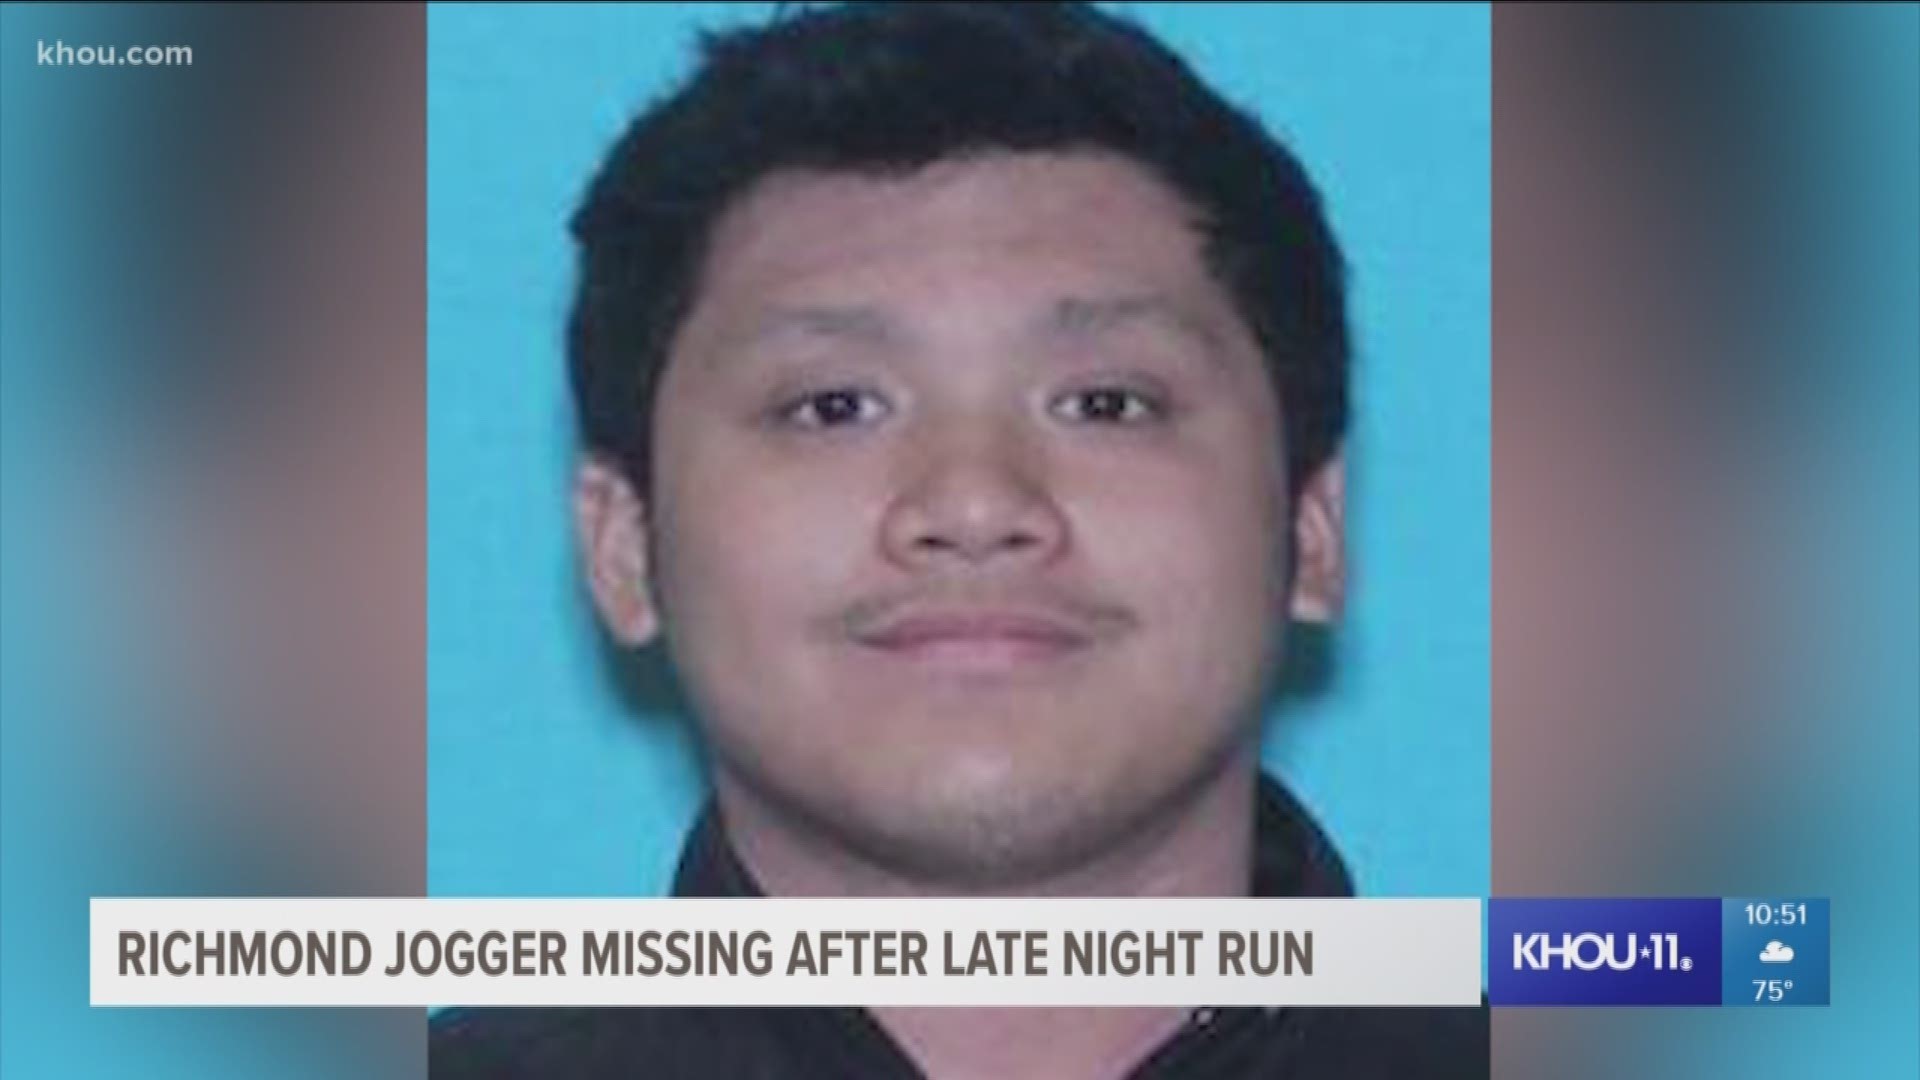 Jeremy Arceo, 21, routinely goes for a jog around 1 a.m. He never returned after doing so Tuesday night.
